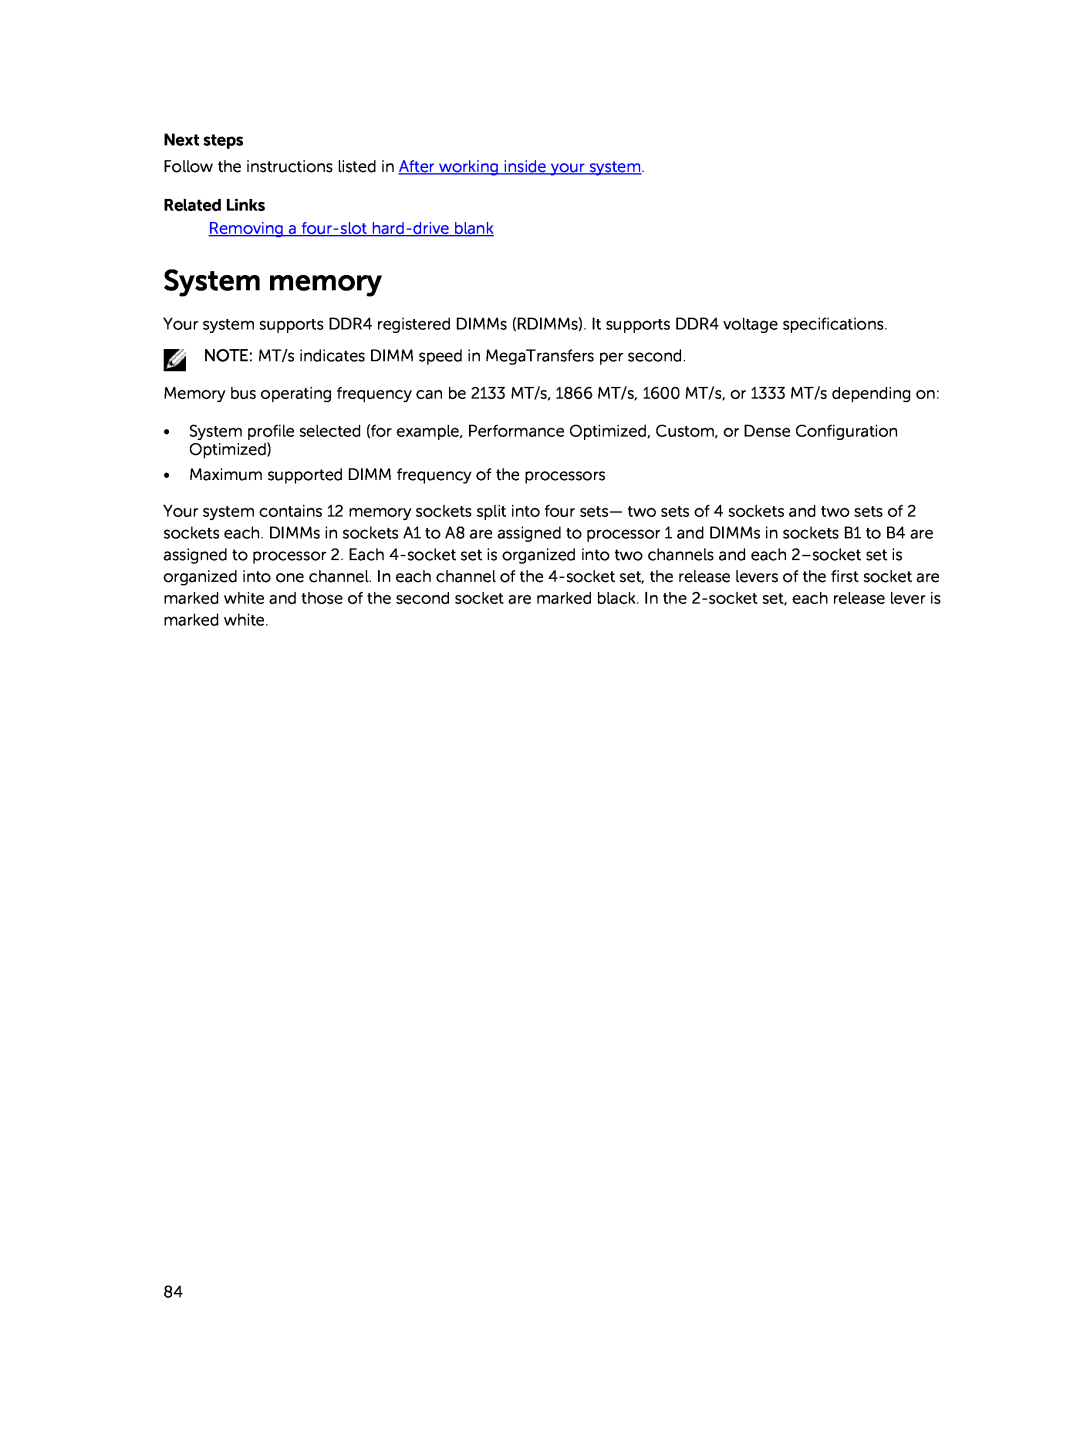 Dell E30S owner manual System memory, Removing a four-slot hard-drive blank 